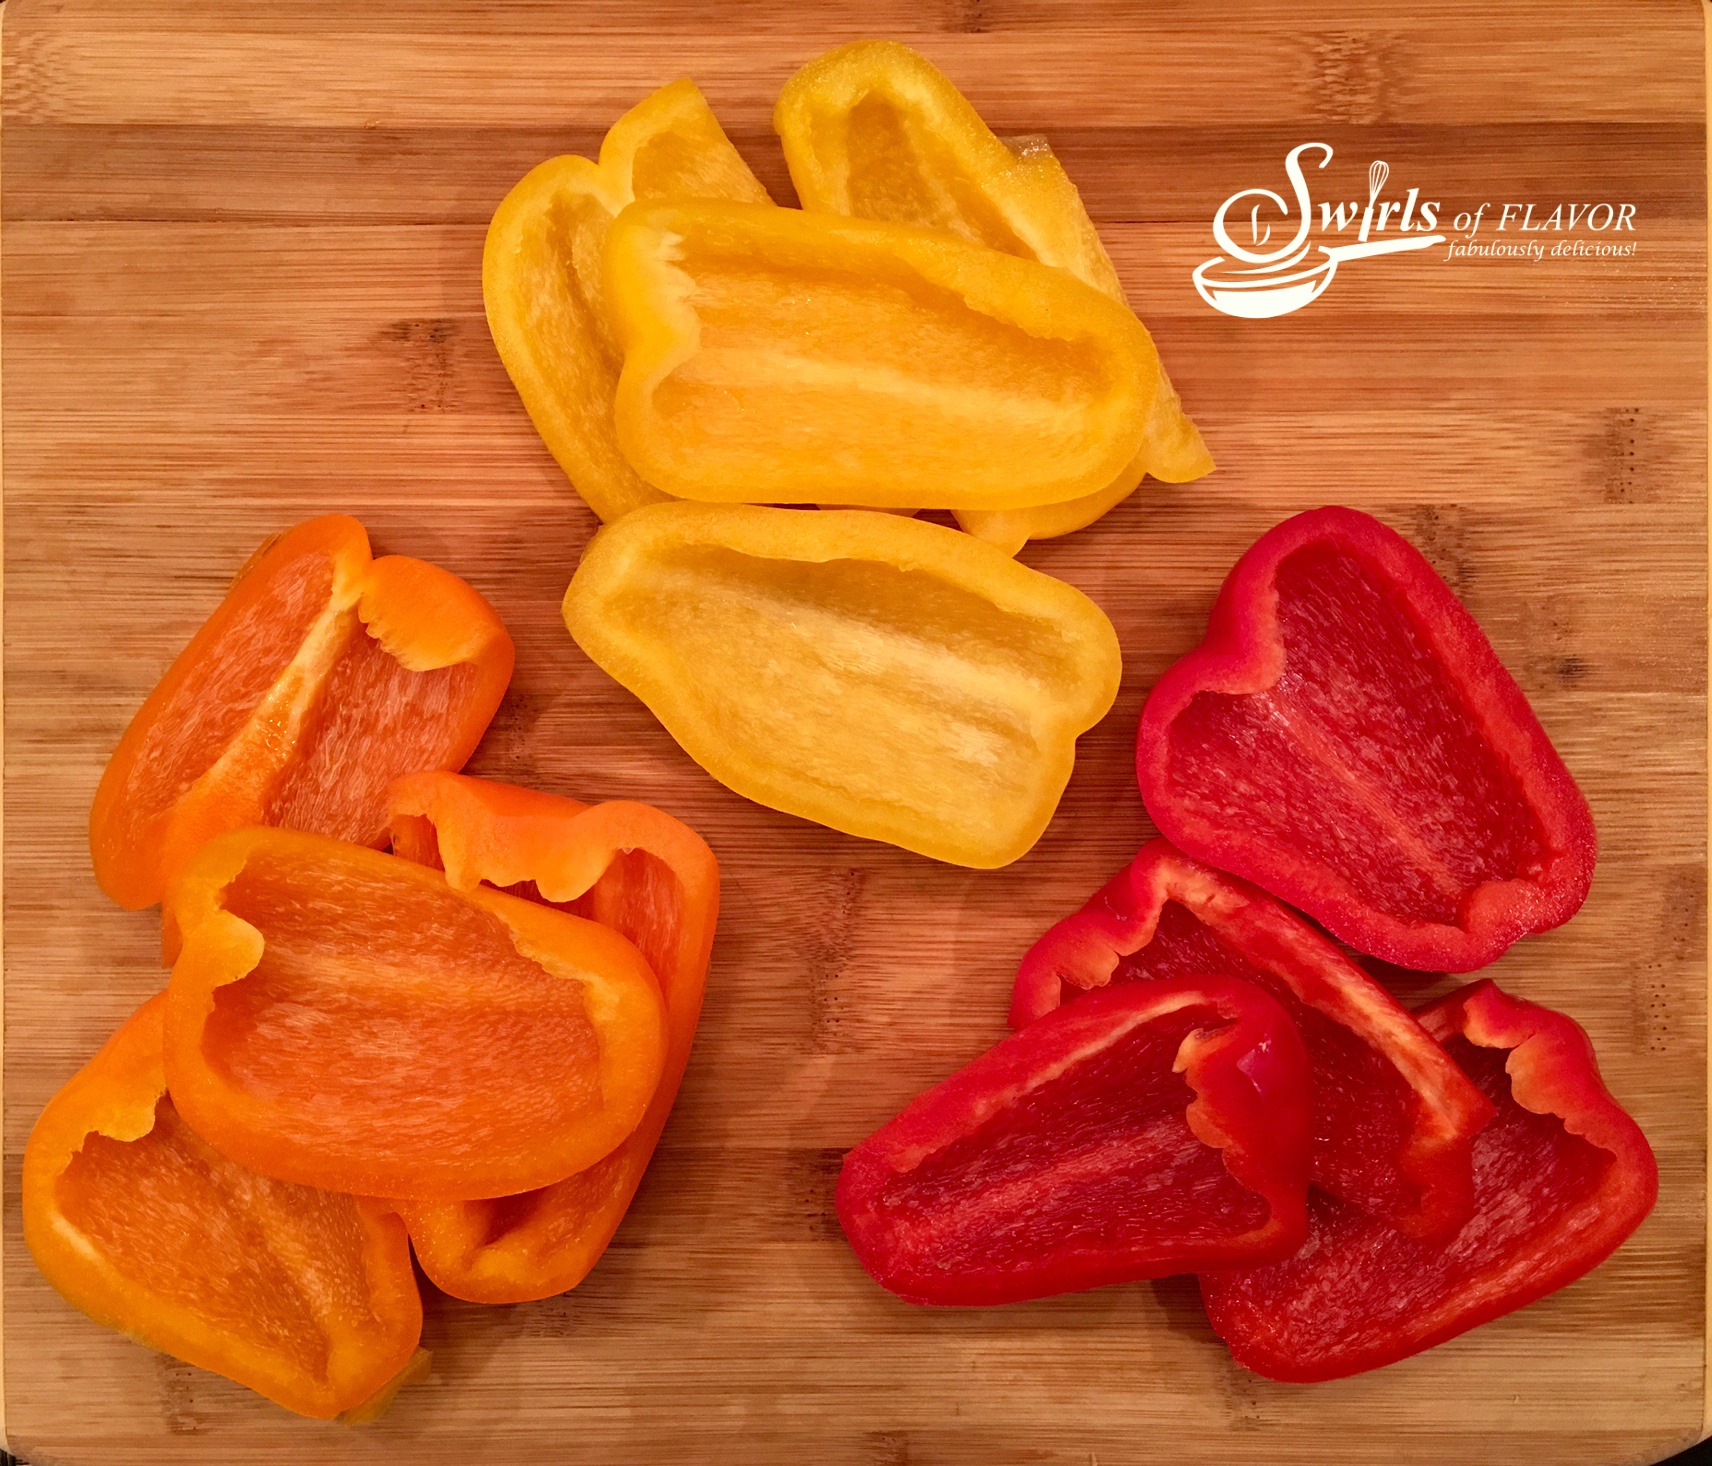 red bell peppers, orange bell peppers and yellow bell peppers, cut up